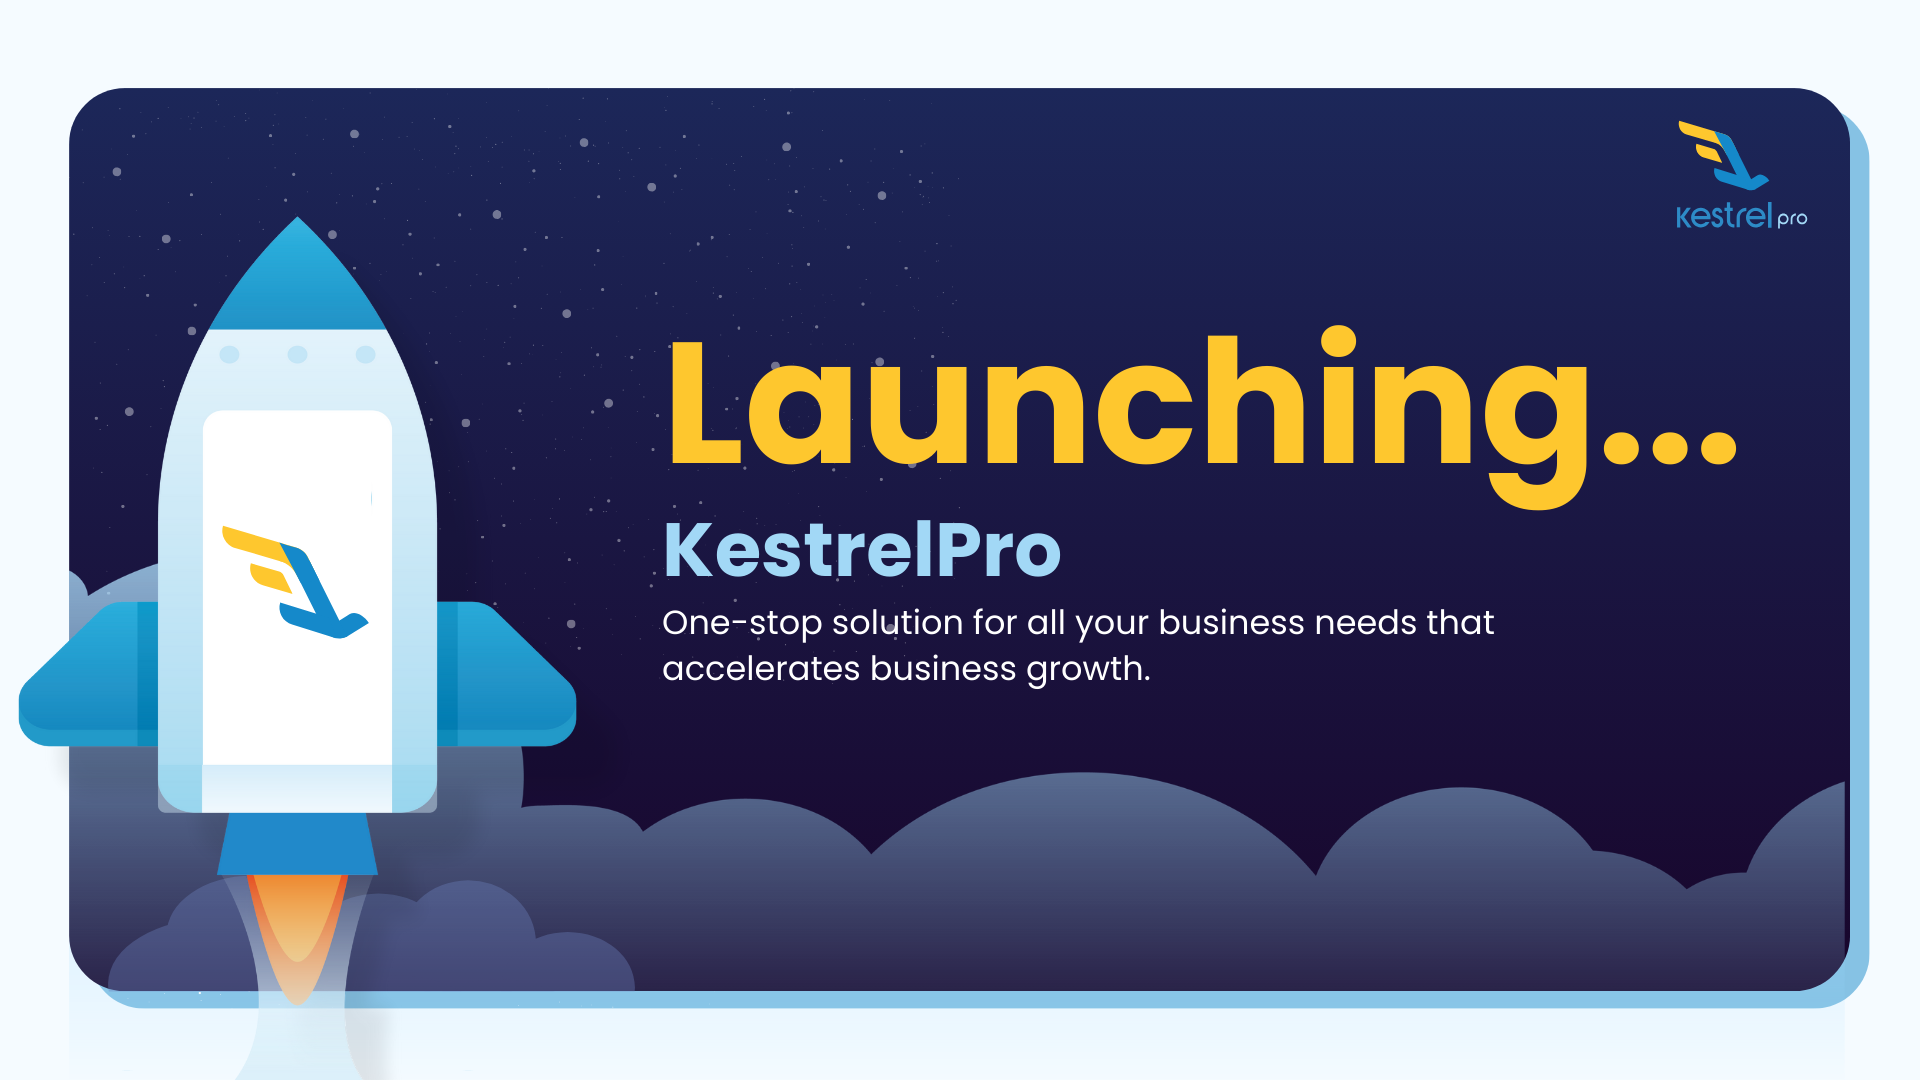 KestrelPro: One-stop solution for all your business needs that accelerates business growth for enterprises